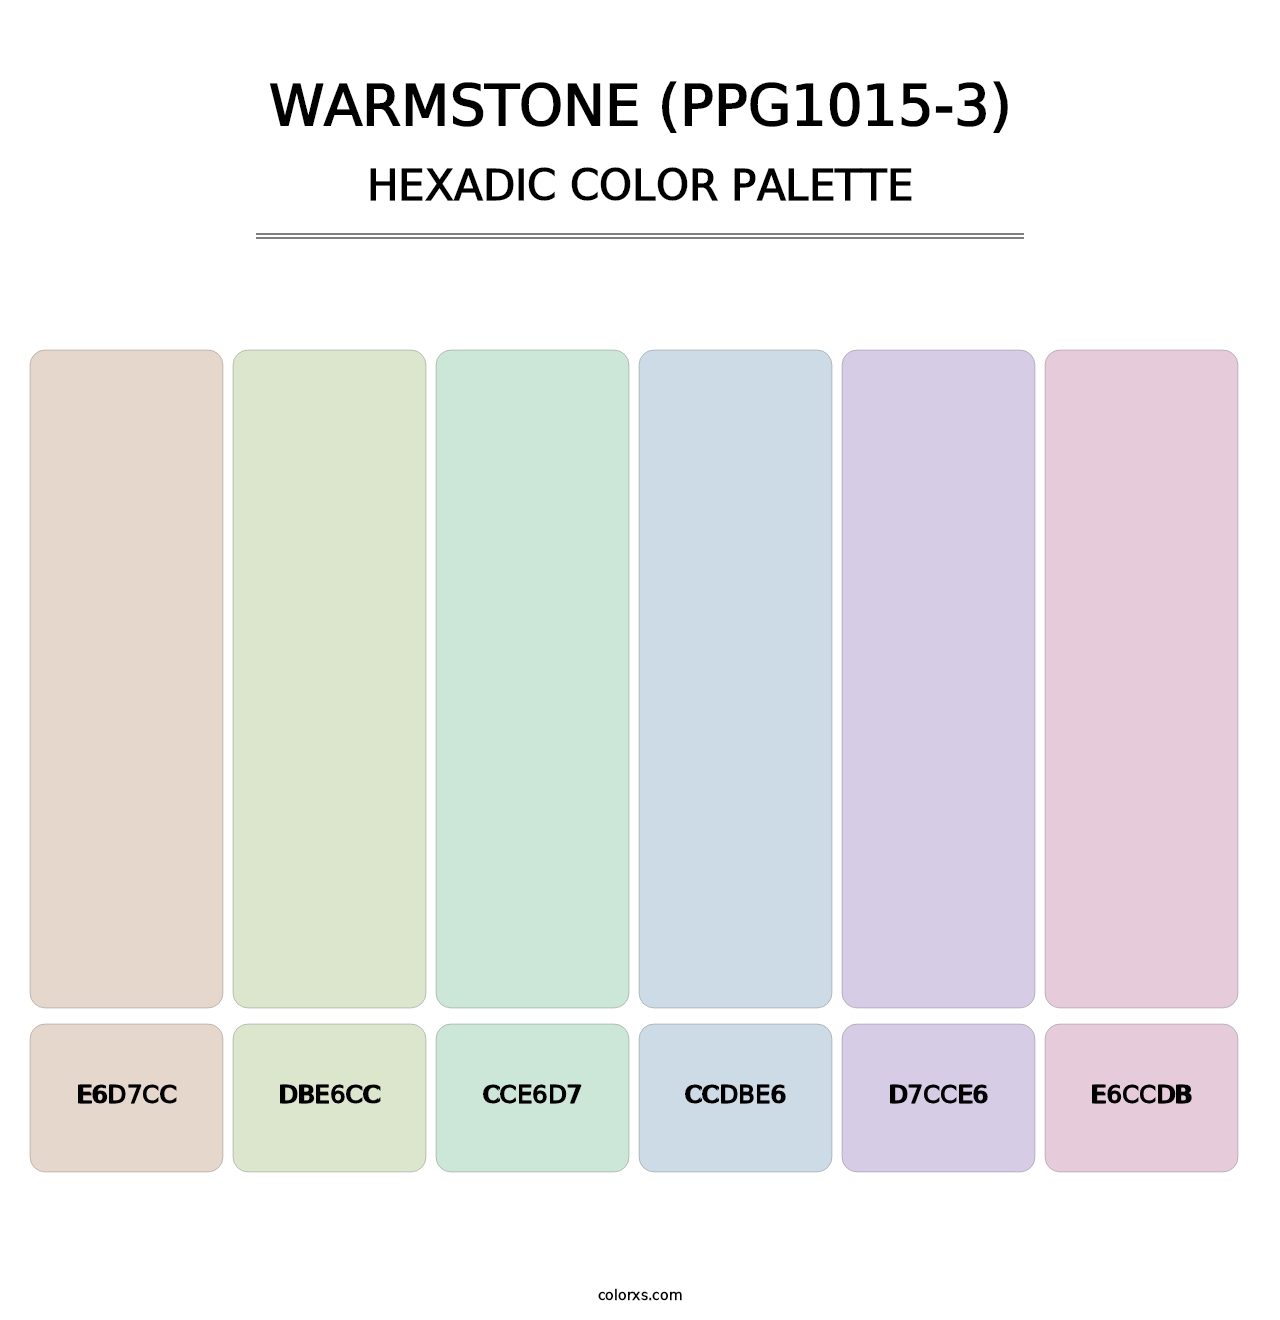 Warmstone (PPG1015-3) - Hexadic Color Palette